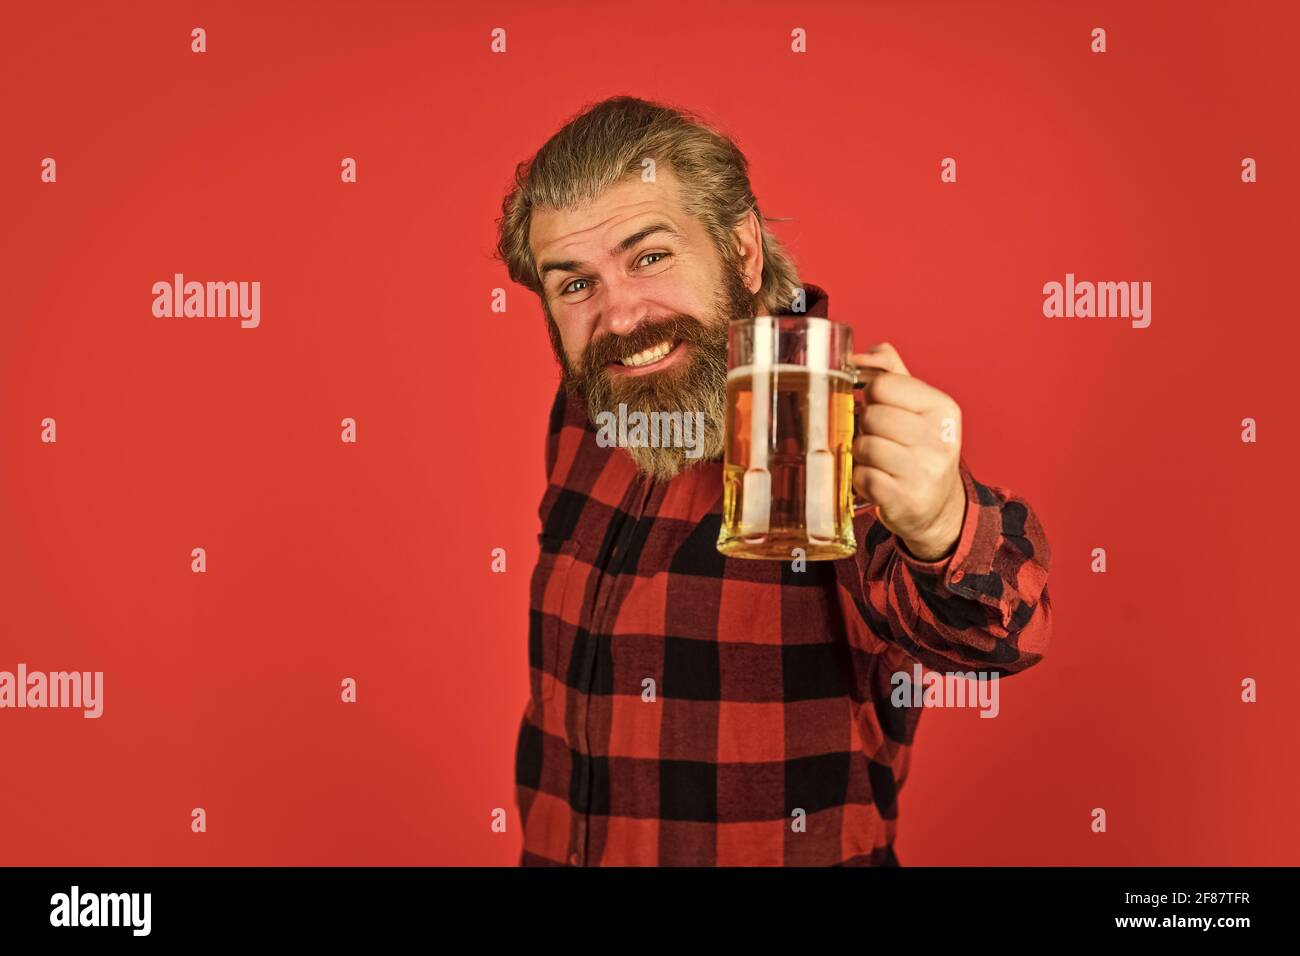 Beer festival. recreation. Man hold glass of beer. hipster at bar counter. having fun watching football. Brutal bearded male drinks beer from glass Stock Photo